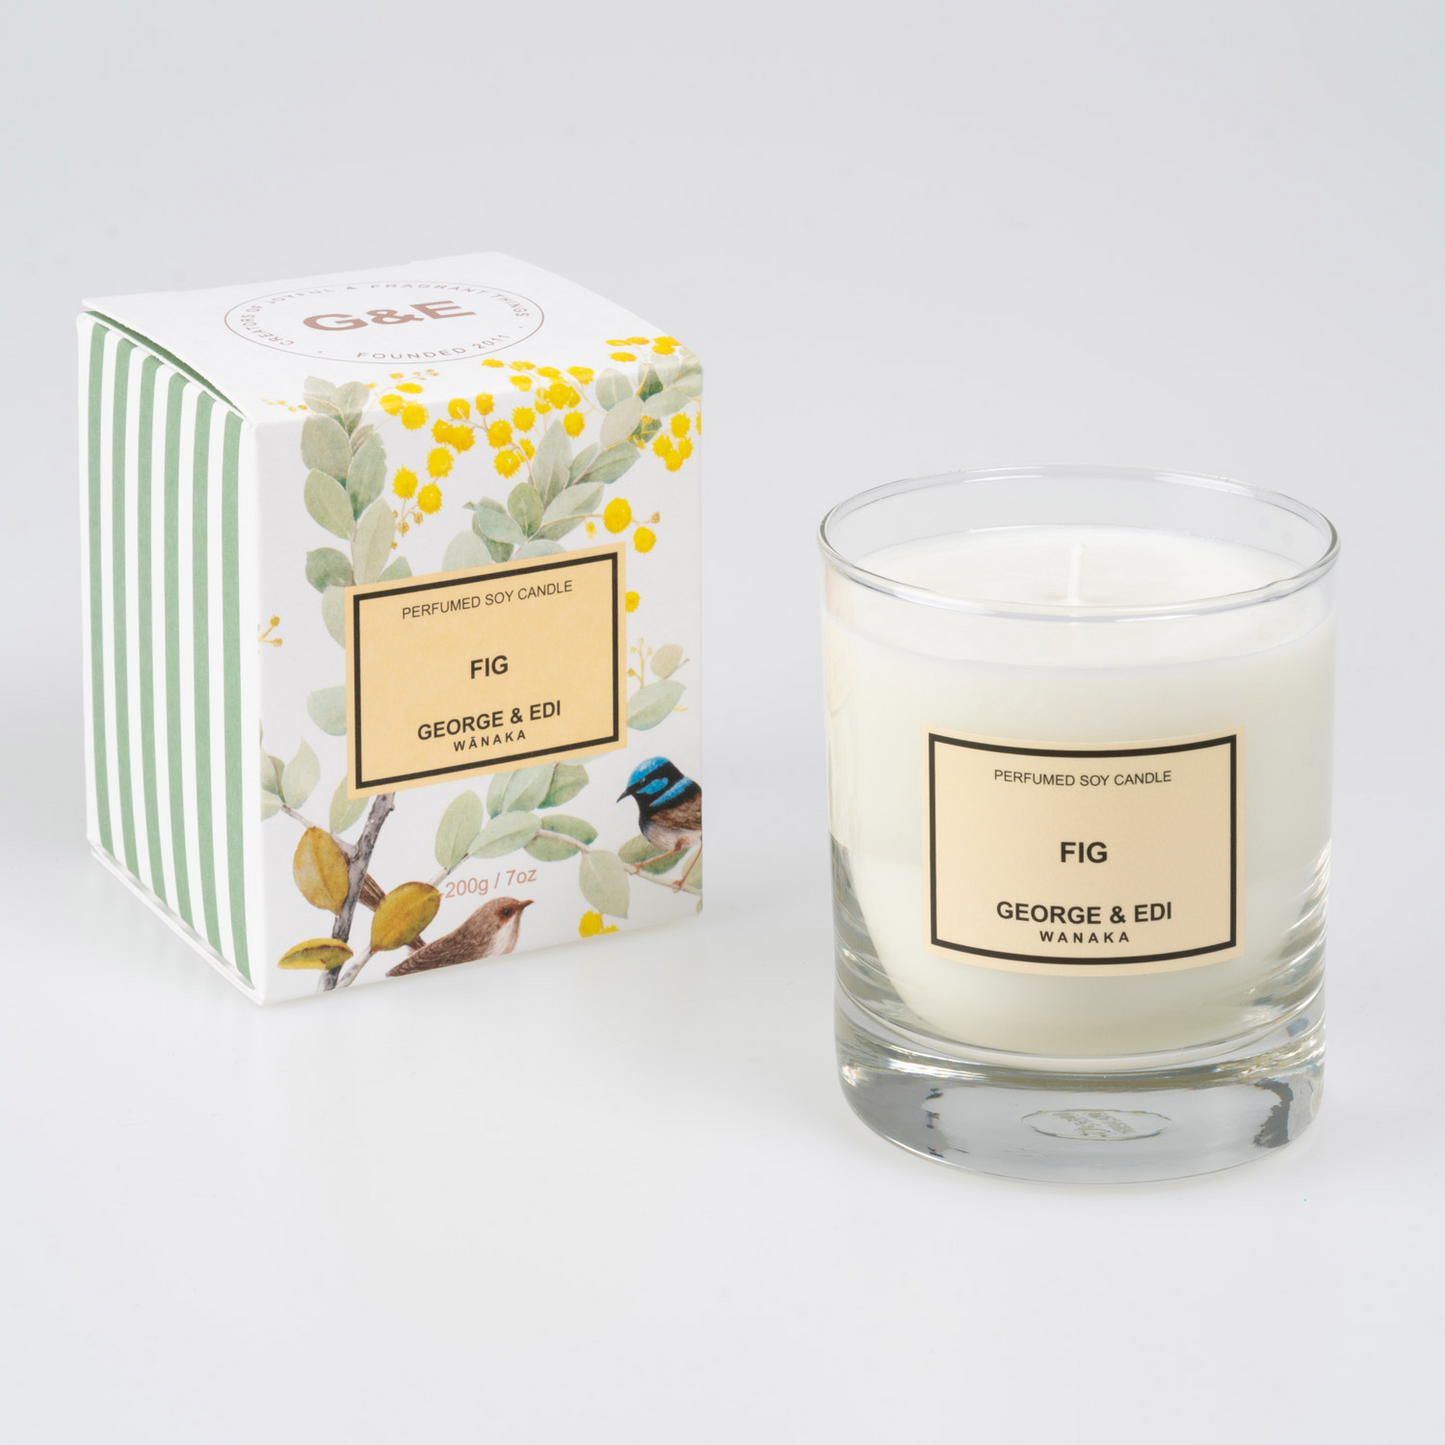 George & Edi Perfumed Soy Candle 200g (8 Scents)